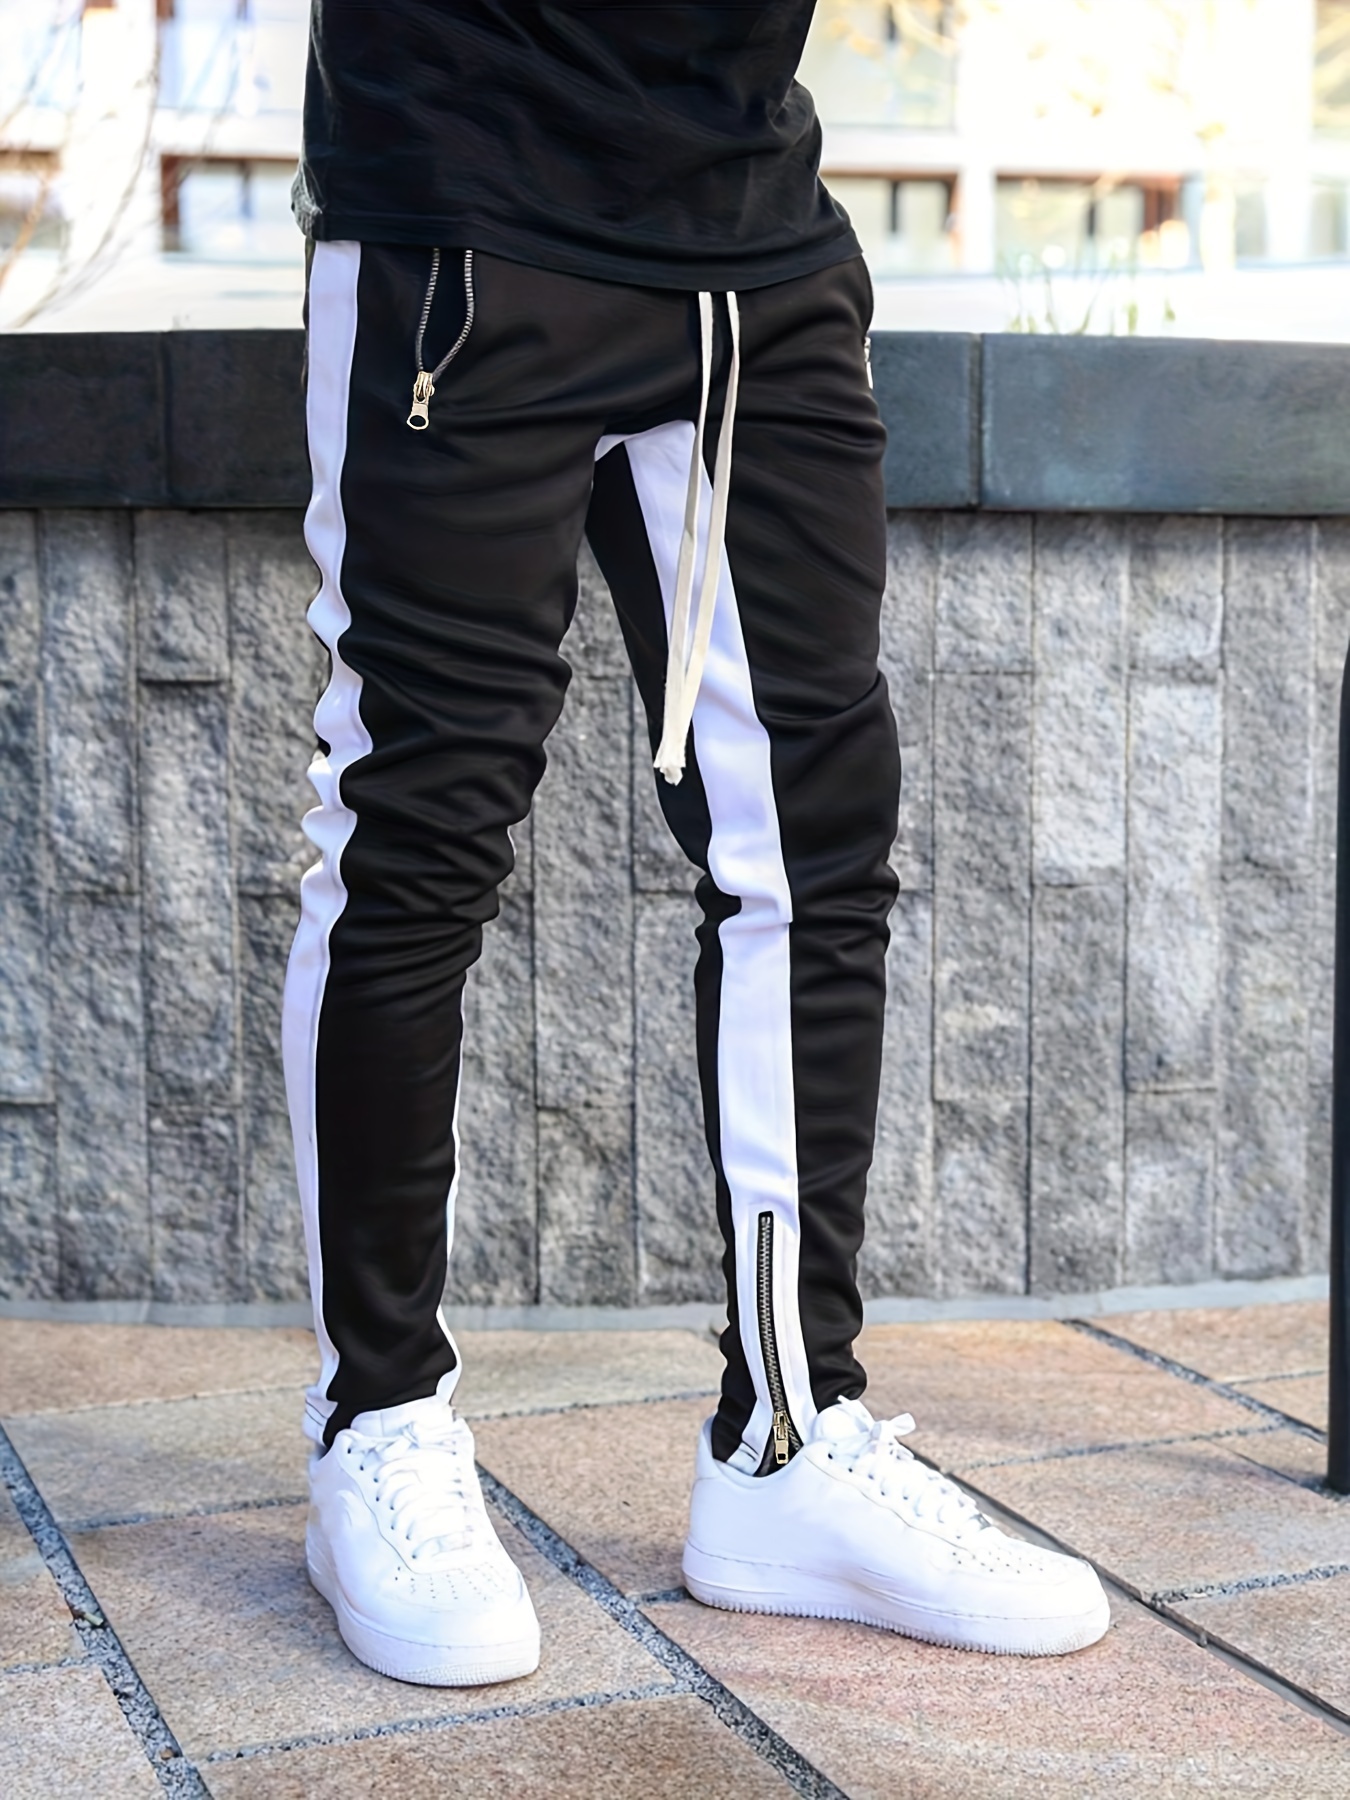 4 Ways to Style Black and White Pants - We Five Kings with We Five Kings  Blog